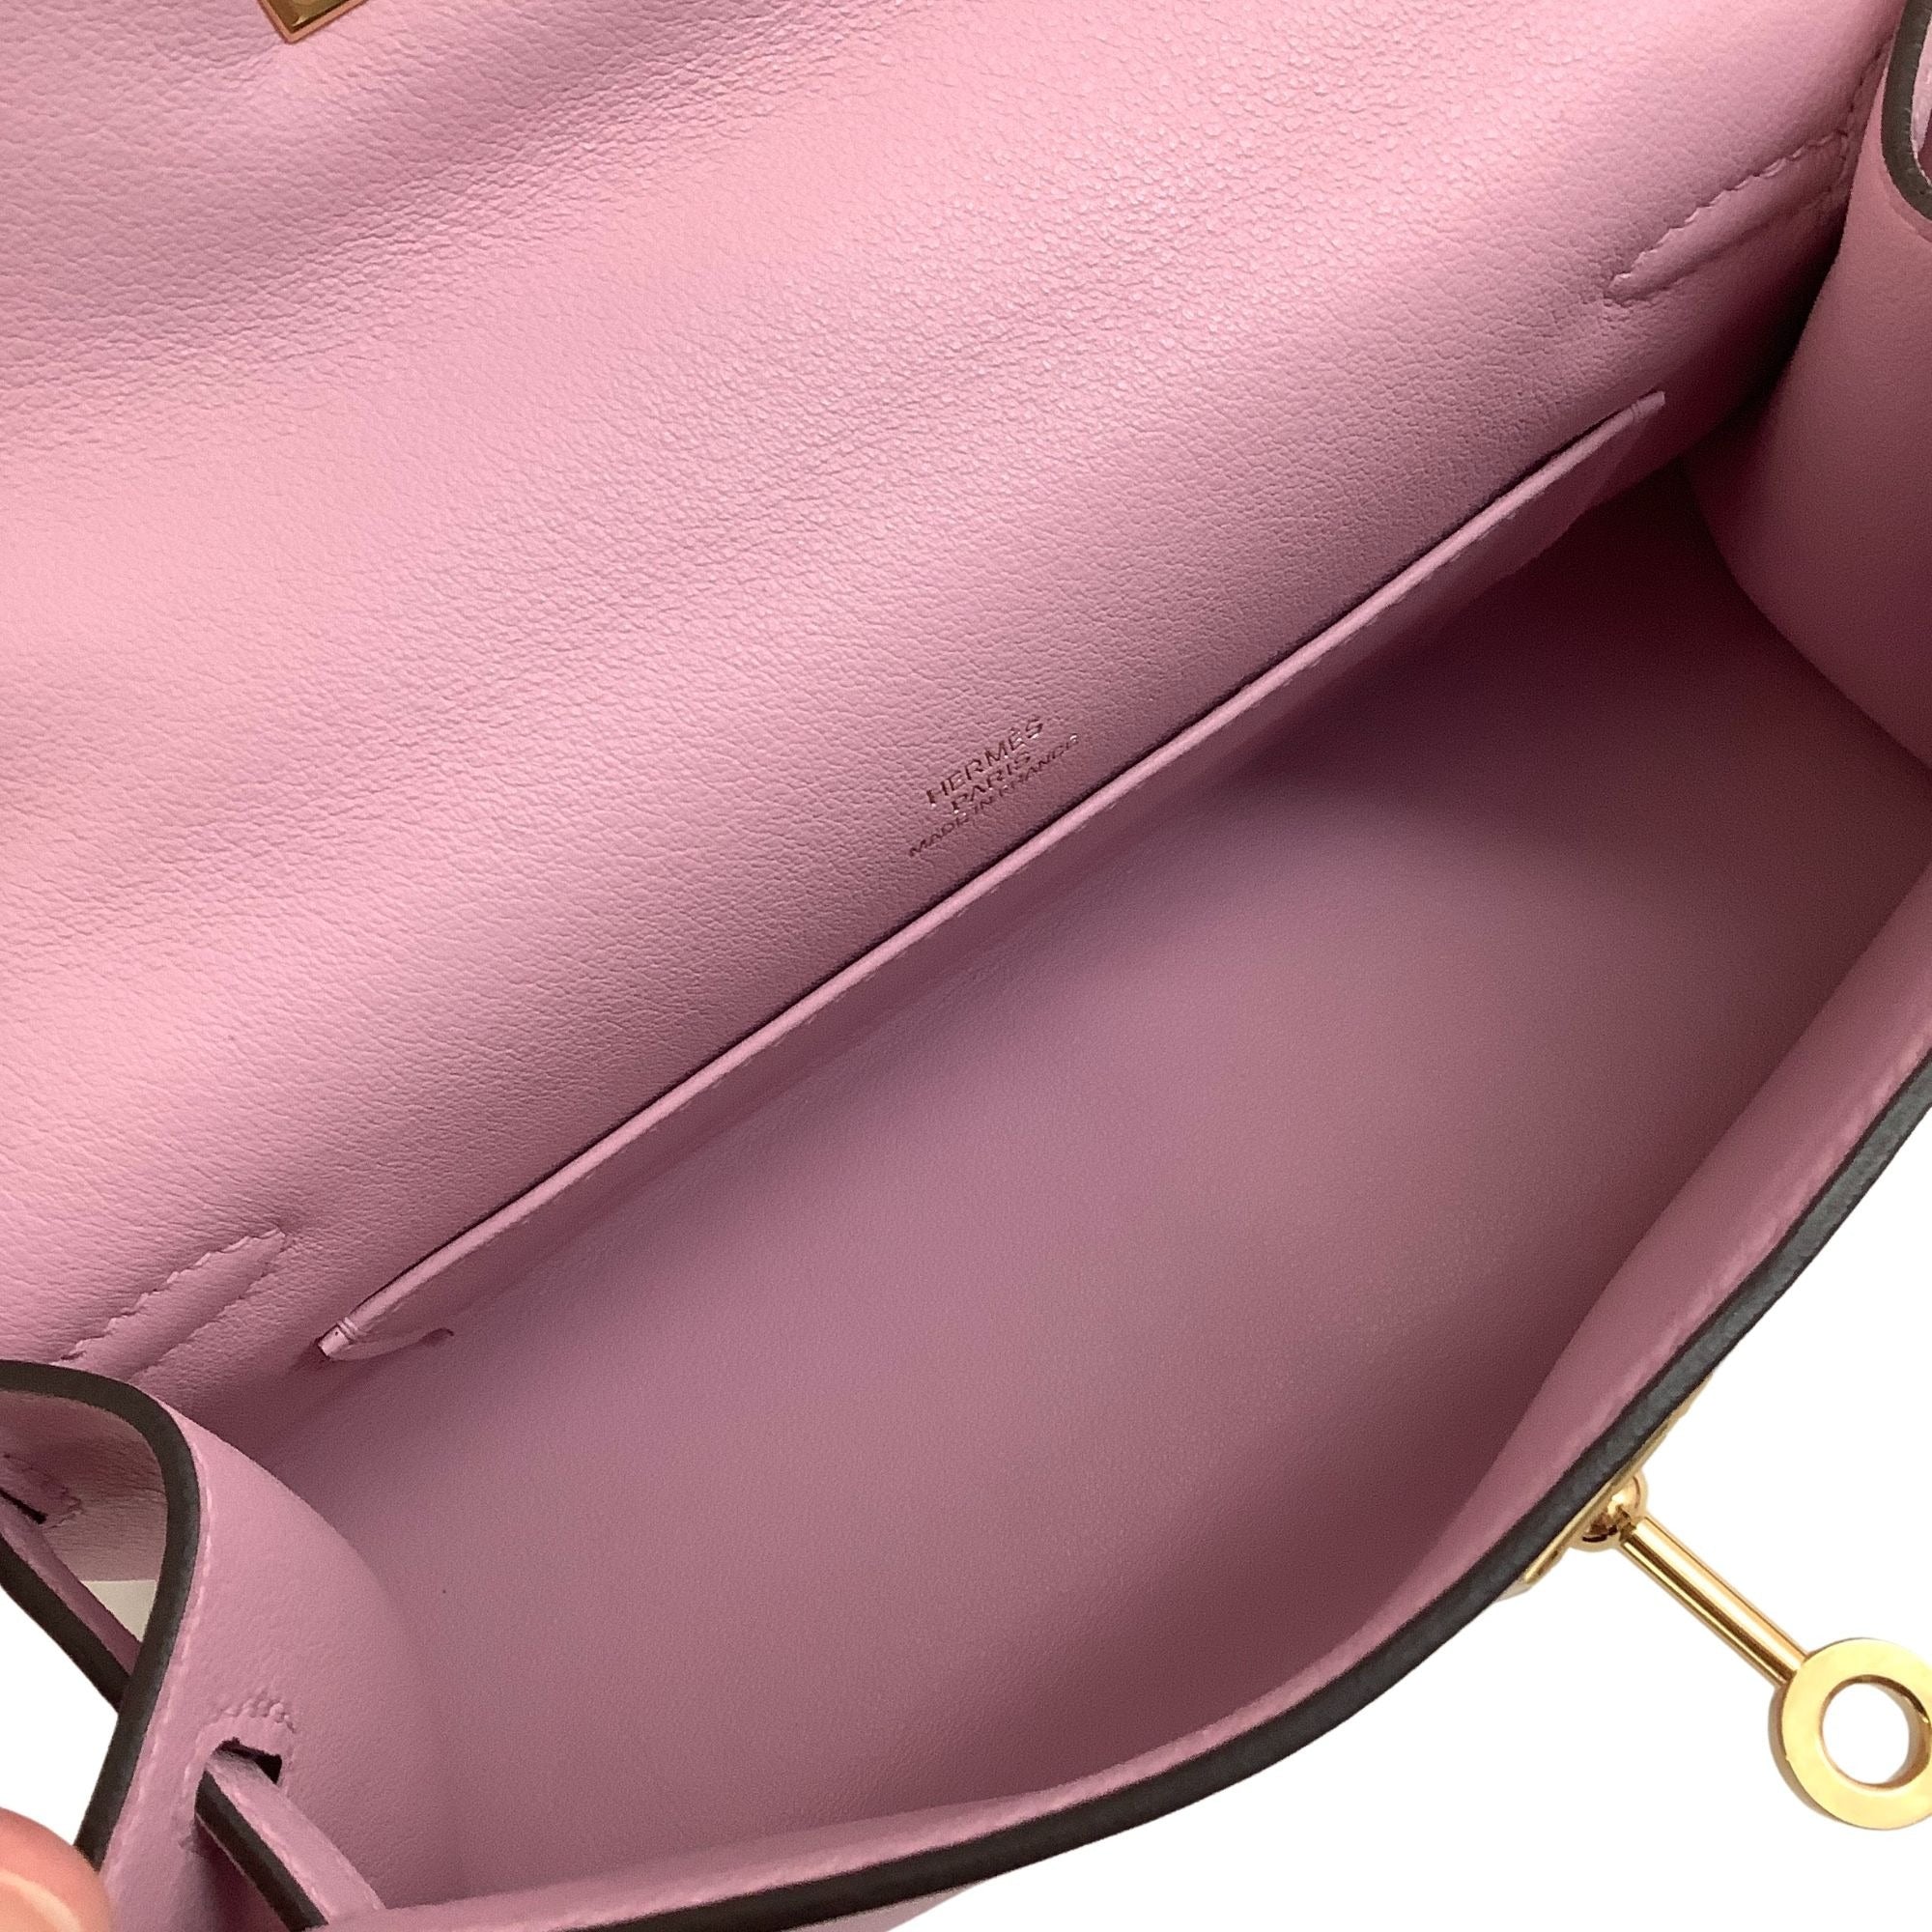 Hermes Pink Leather 2021 Kelly Pouchette